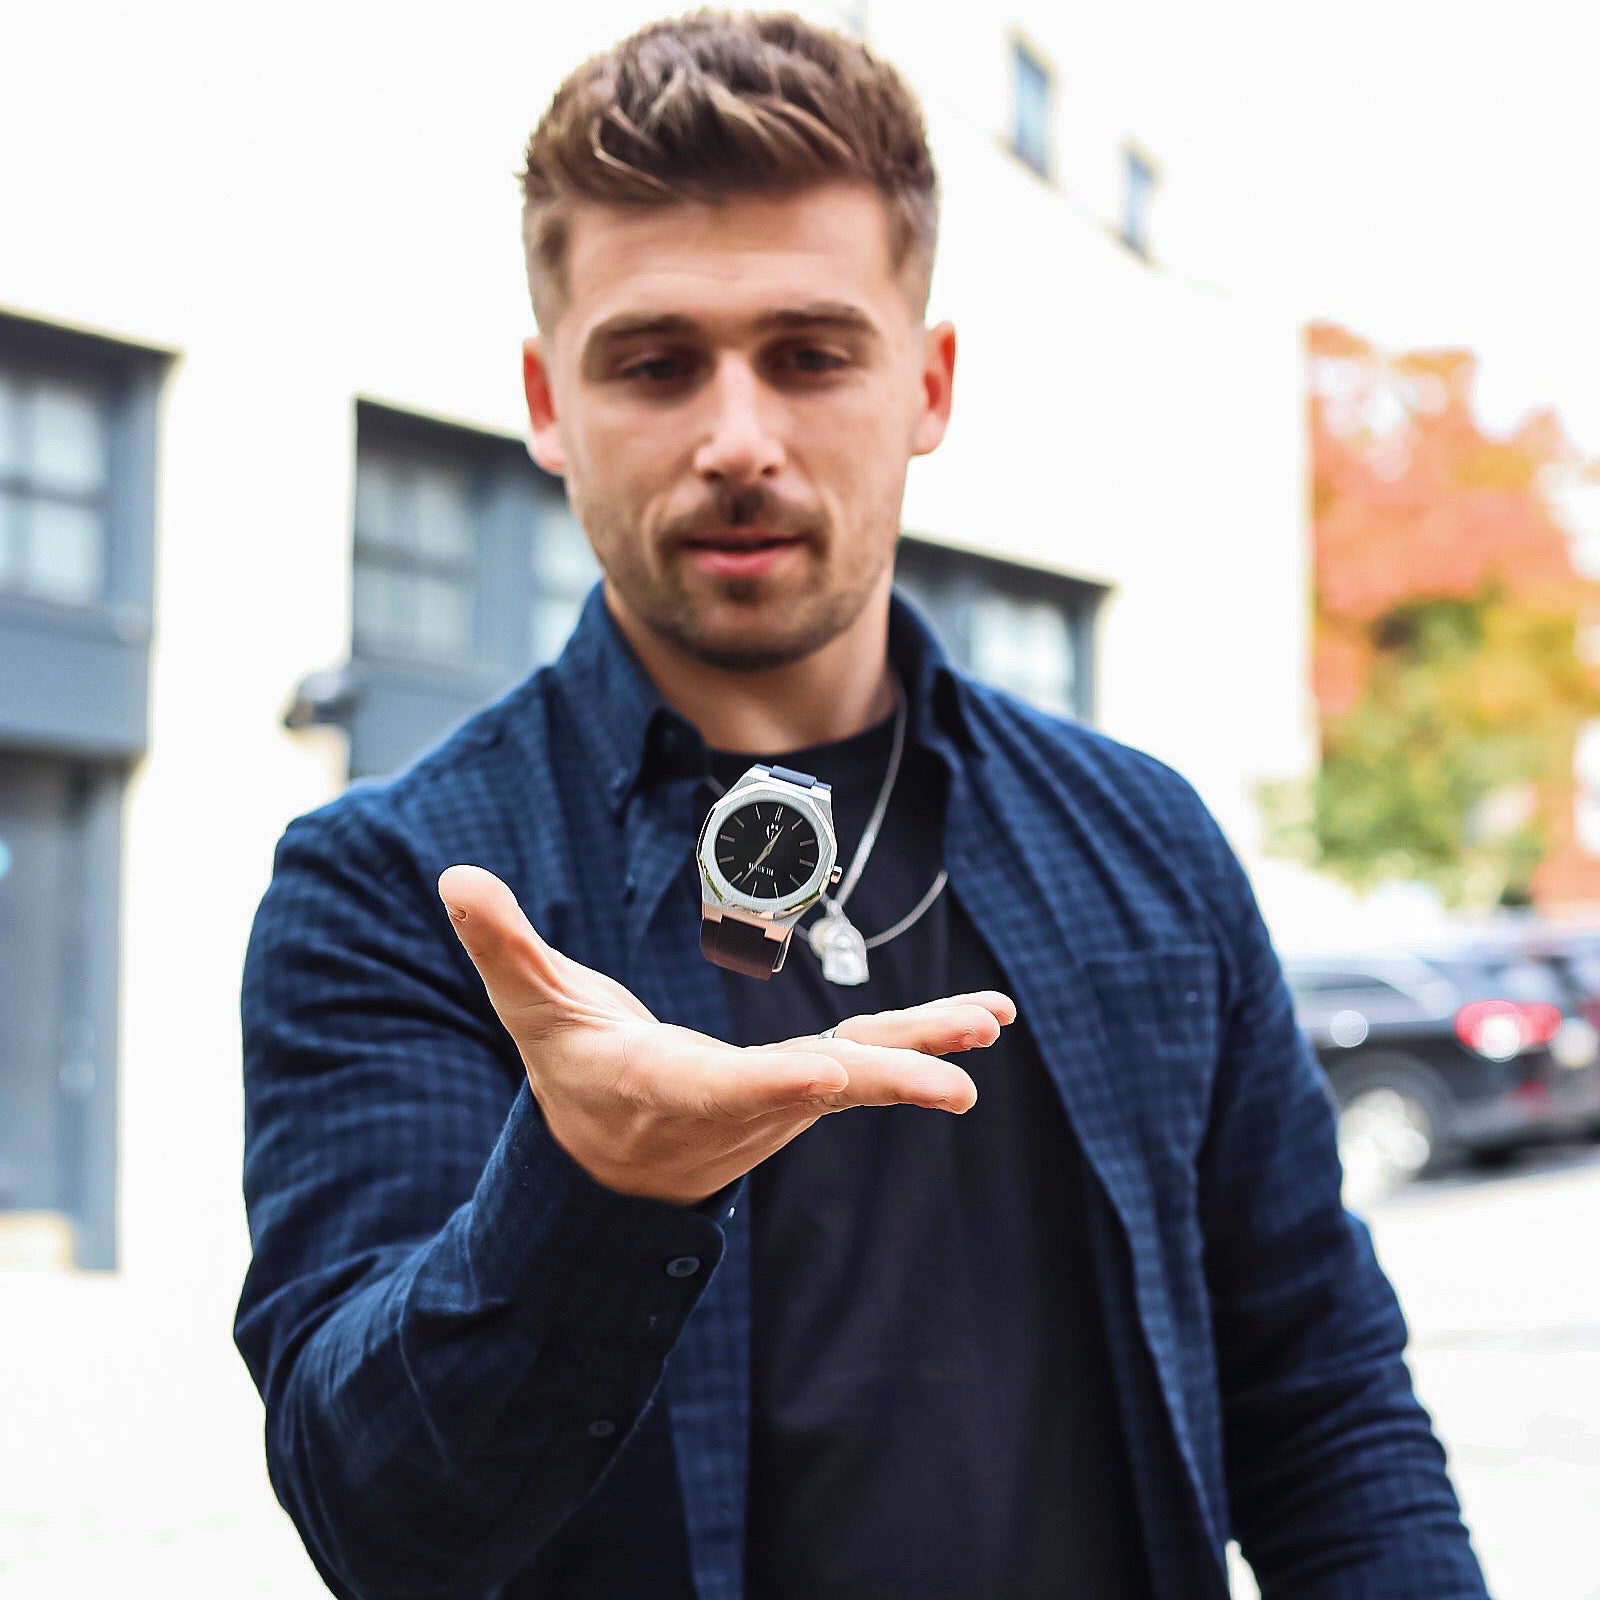 The 12 Best Modern Watches for Men Under $200 (You’ll Love #7)